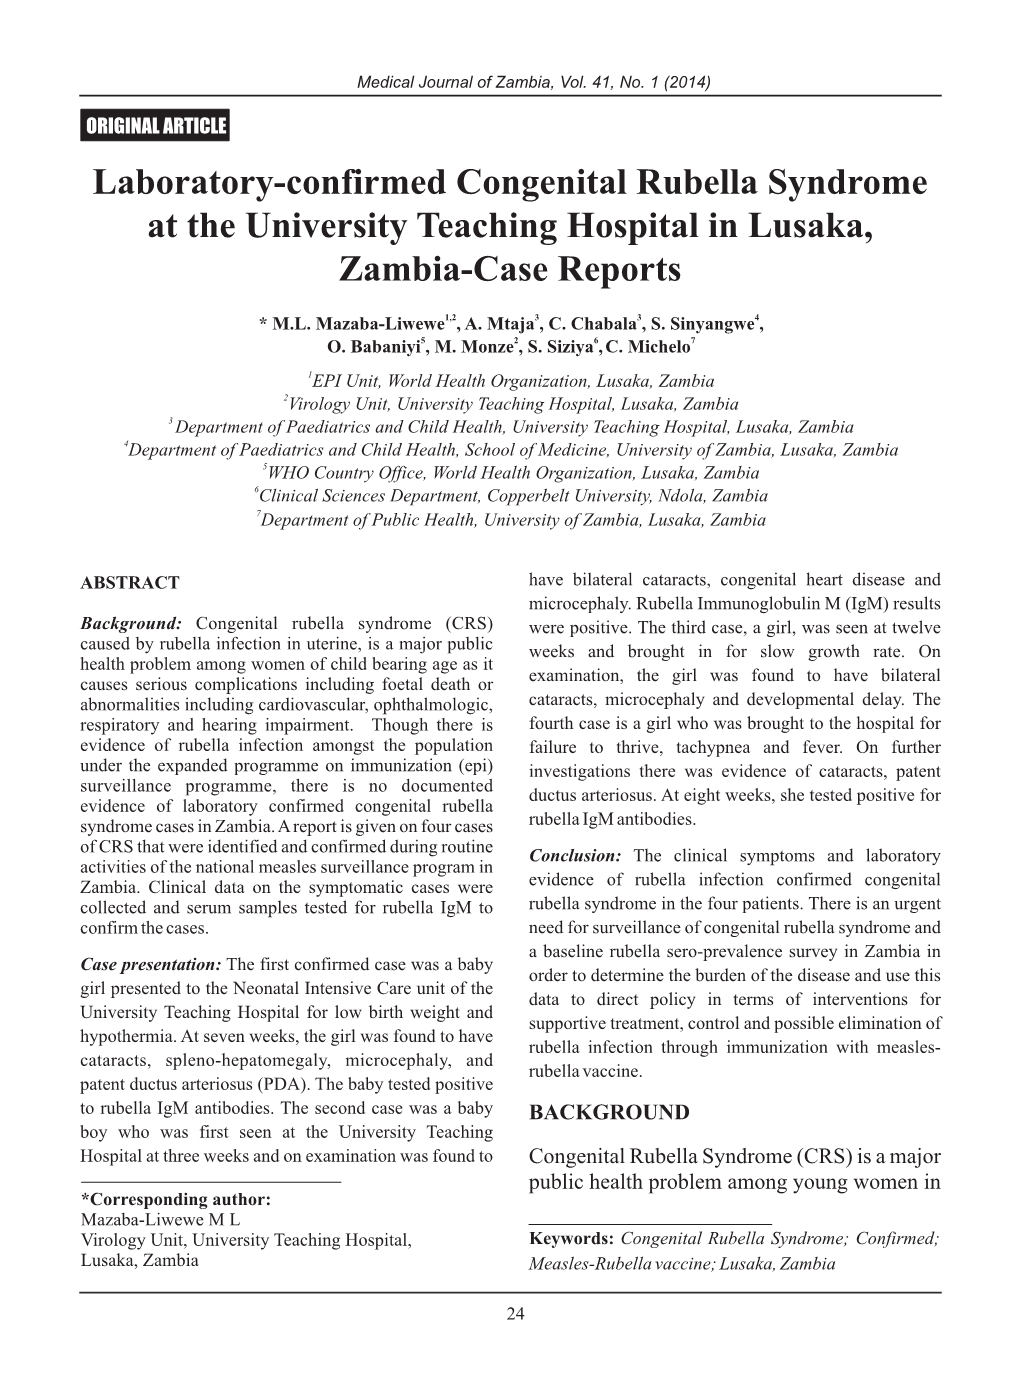 Laboratory-Confirmed Congenital Rubella Syndrome at the University Teaching Hospital in Lusaka, Zambia-Case Reports